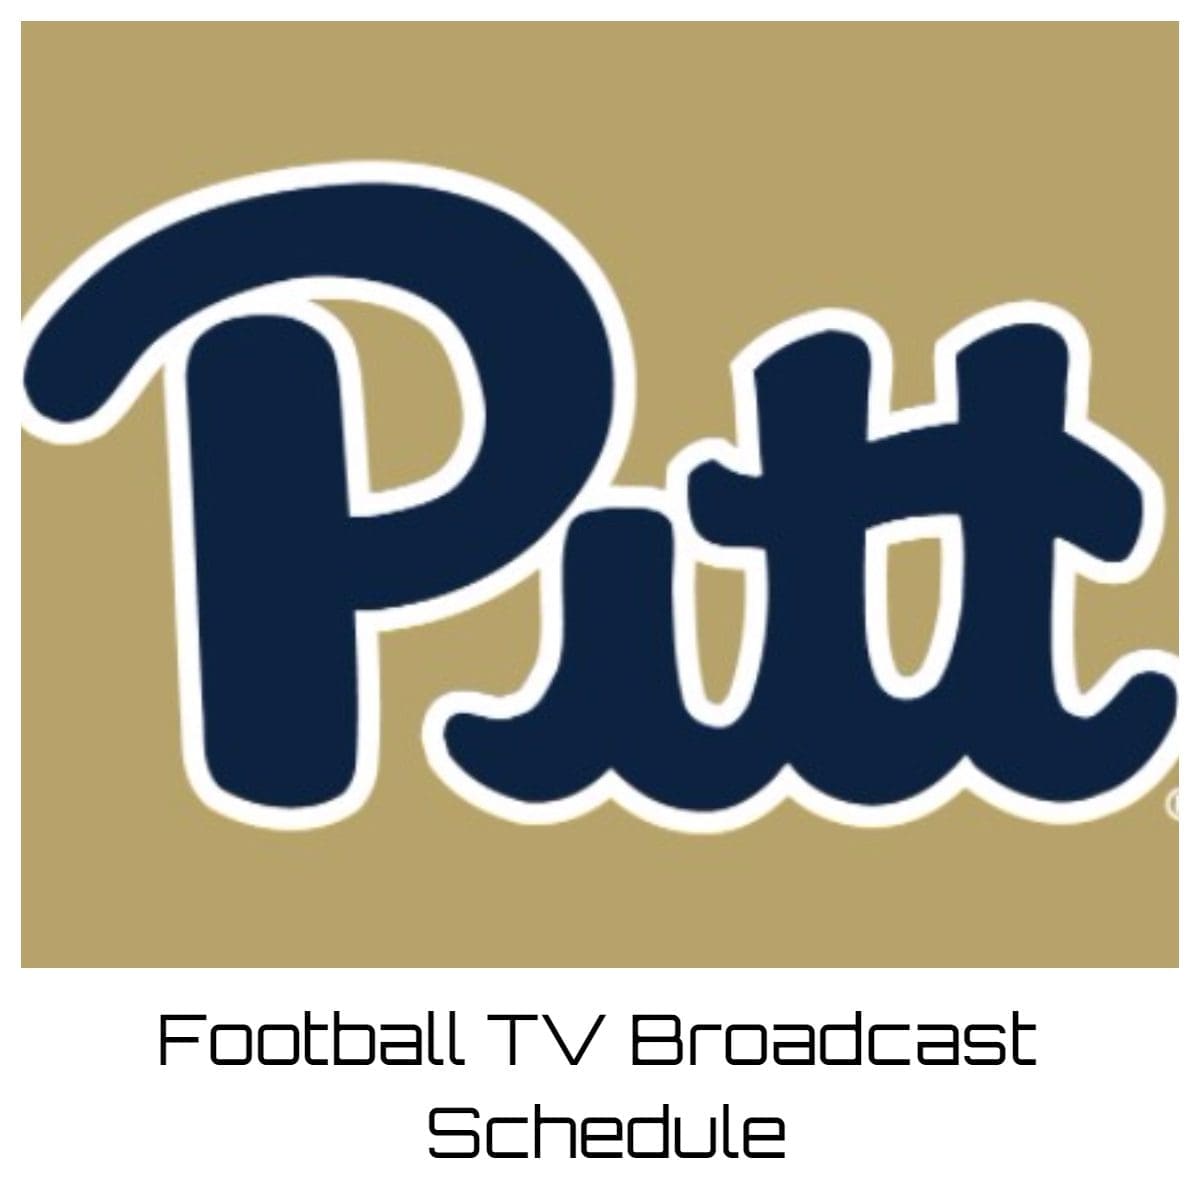 Pittsburgh Panthers Football TV Broadcast Schedule